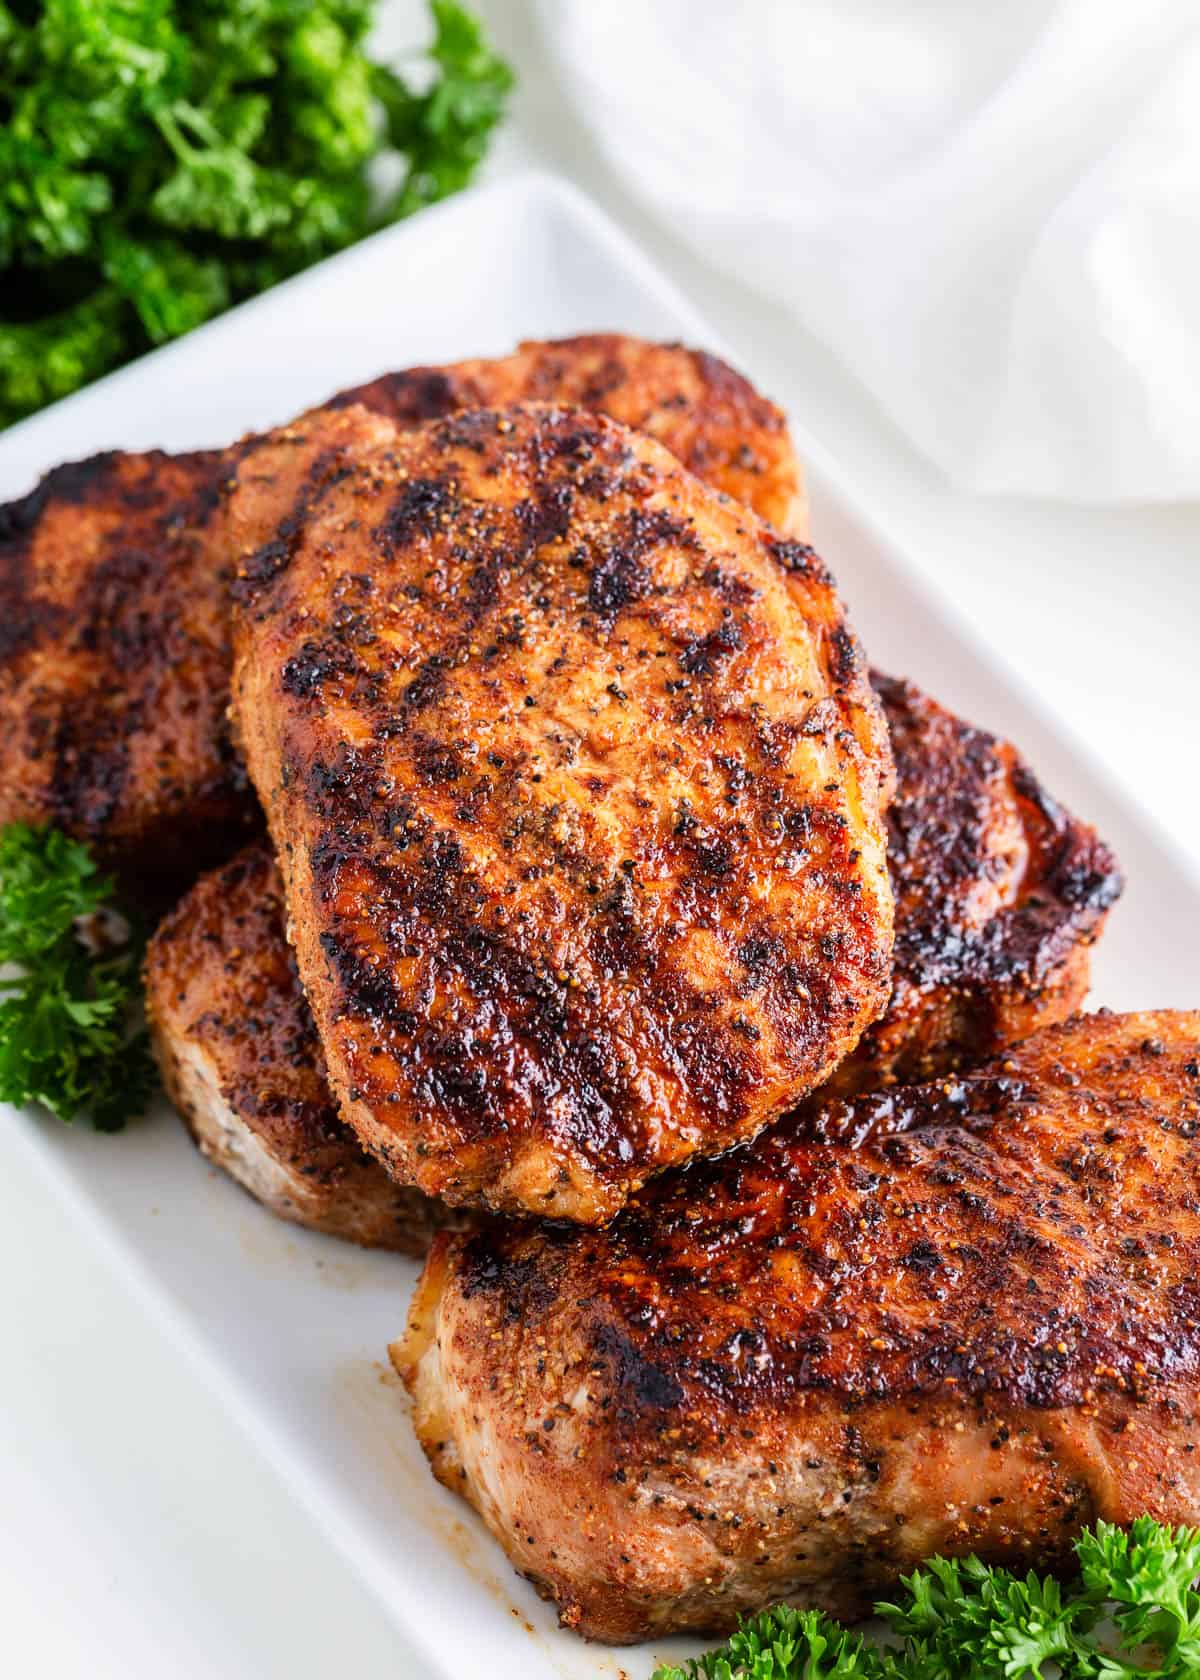 Grilled pork chops on a white plate with parsley.